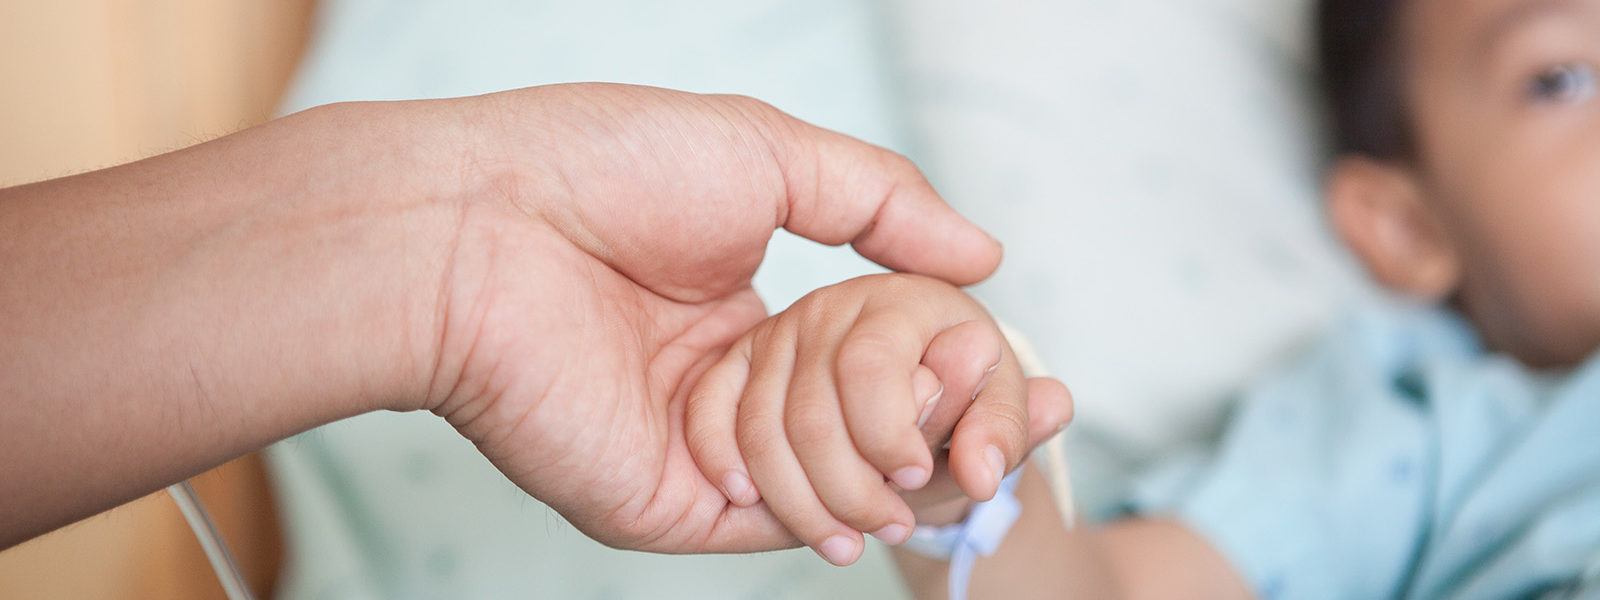 holding-child-patient-hand